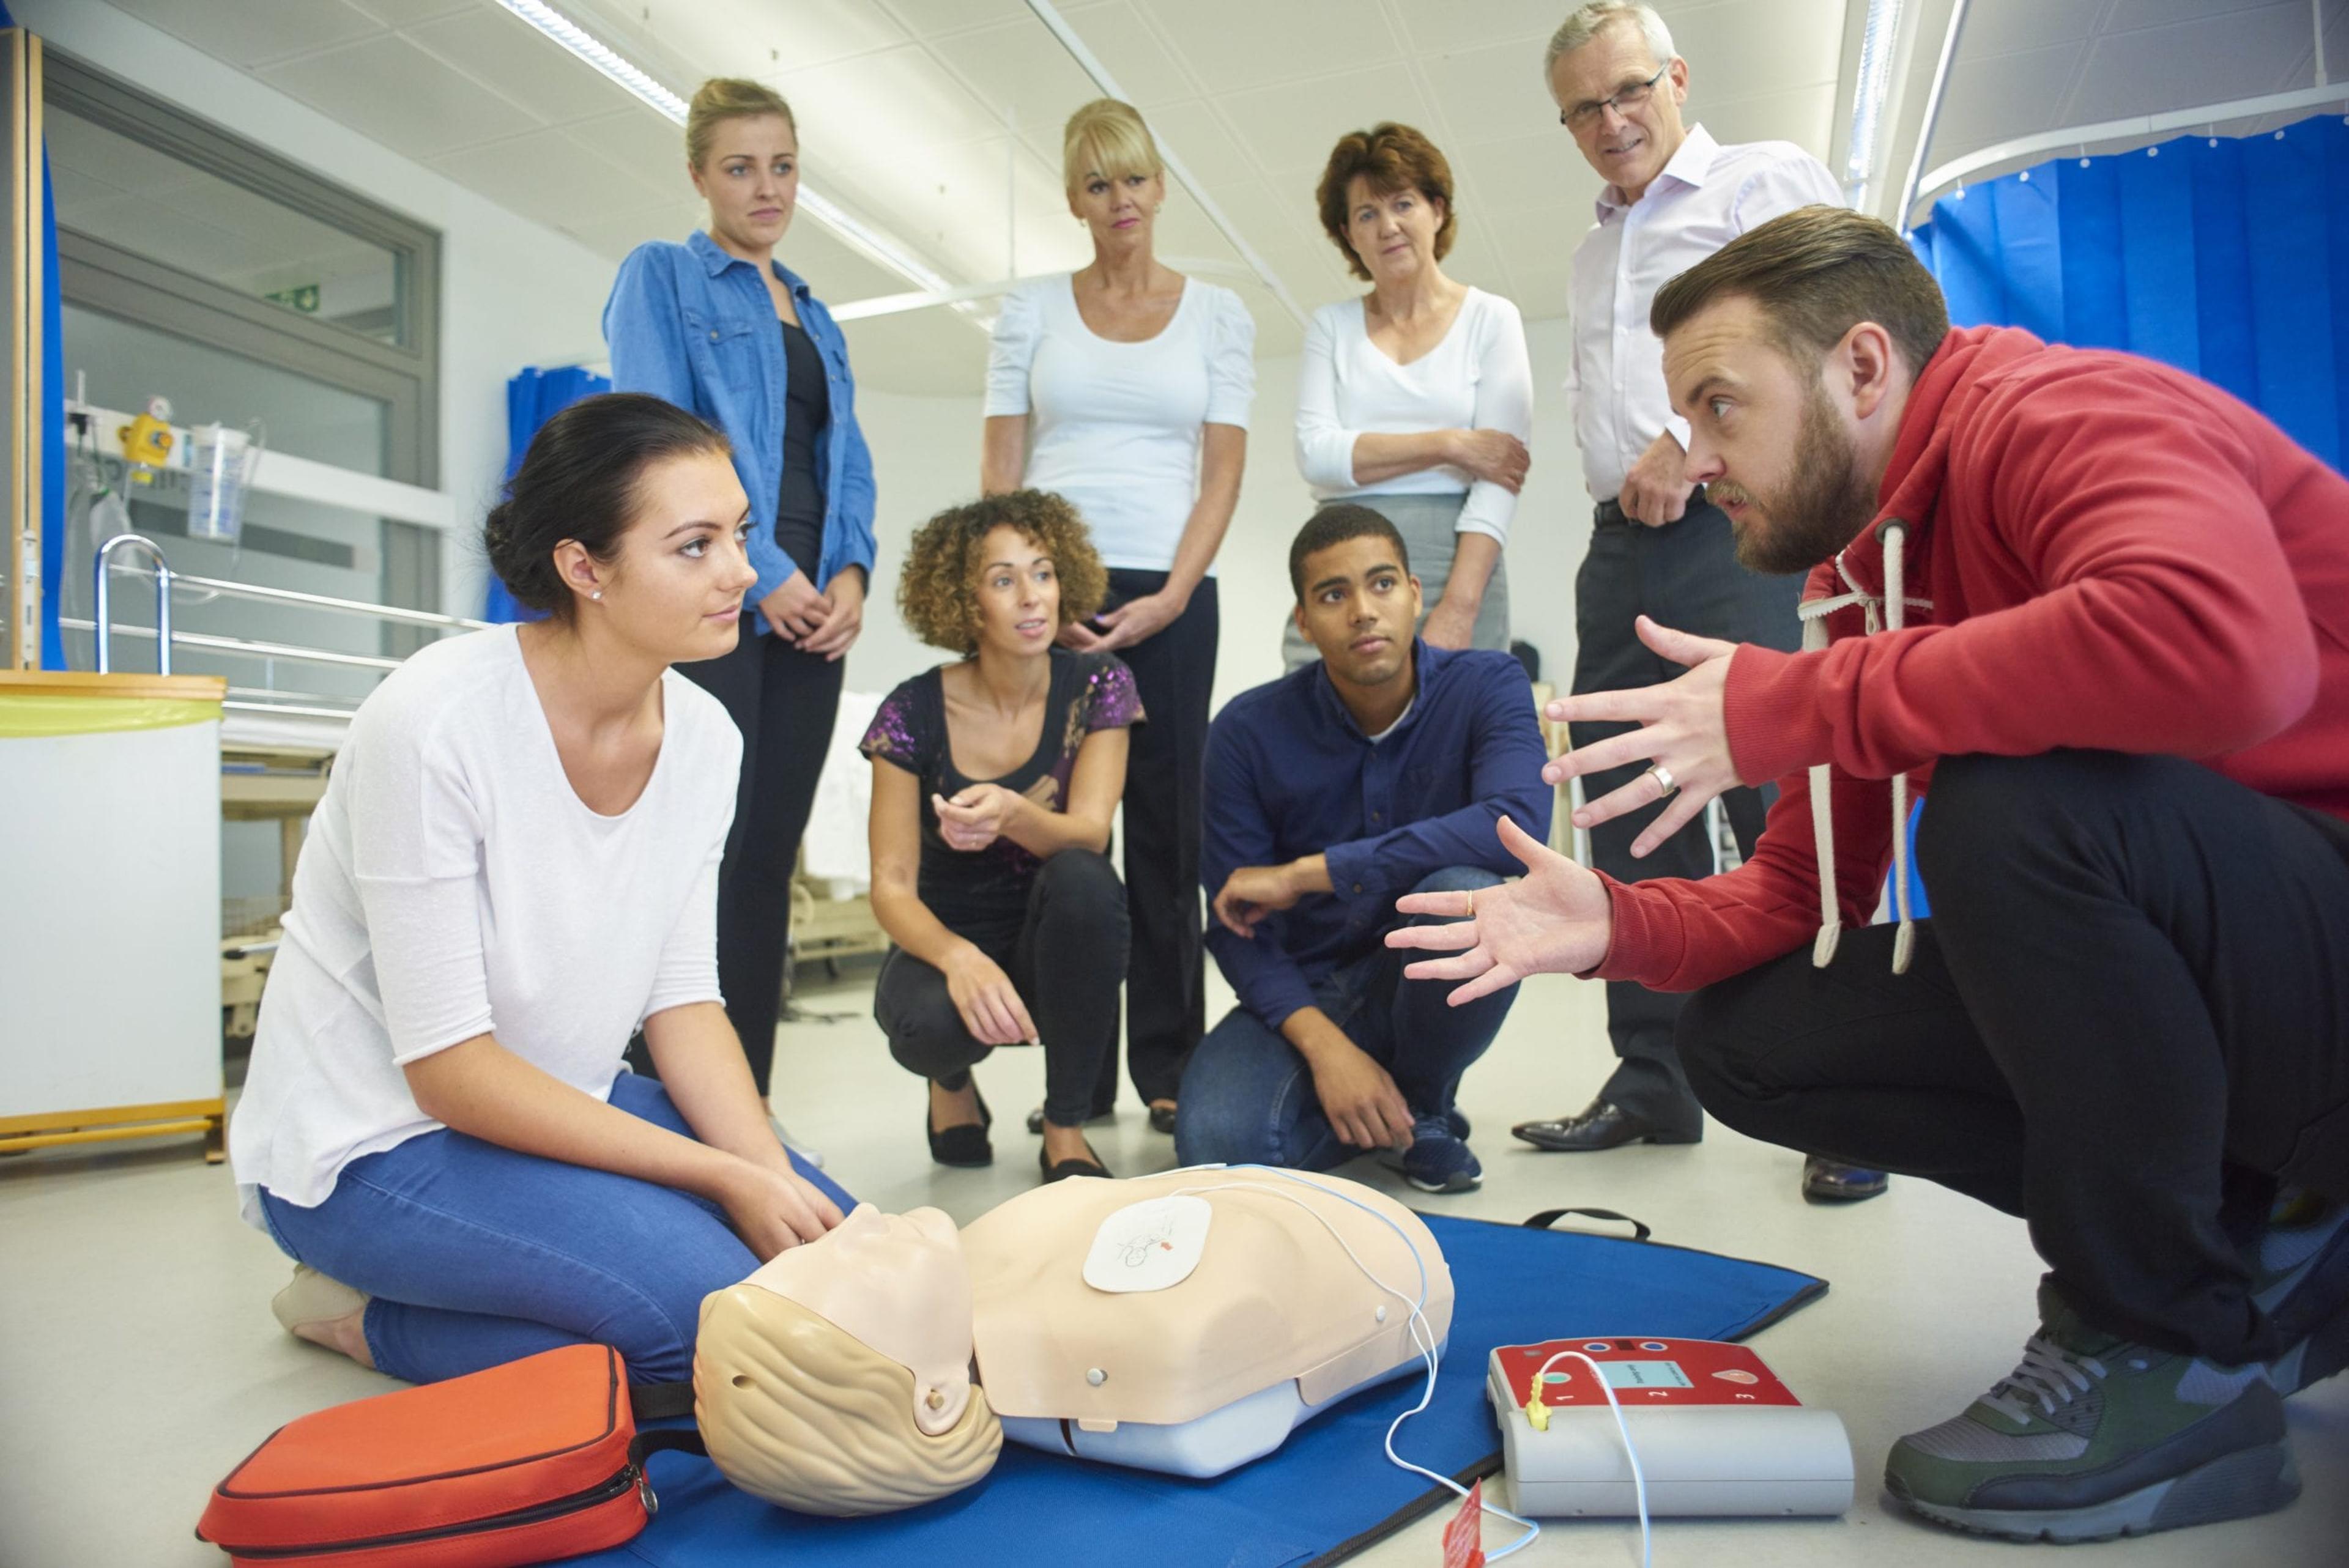 a mixed age group listen to their tutor as he shows the procedure involved to resuscitate using a defibrillator.